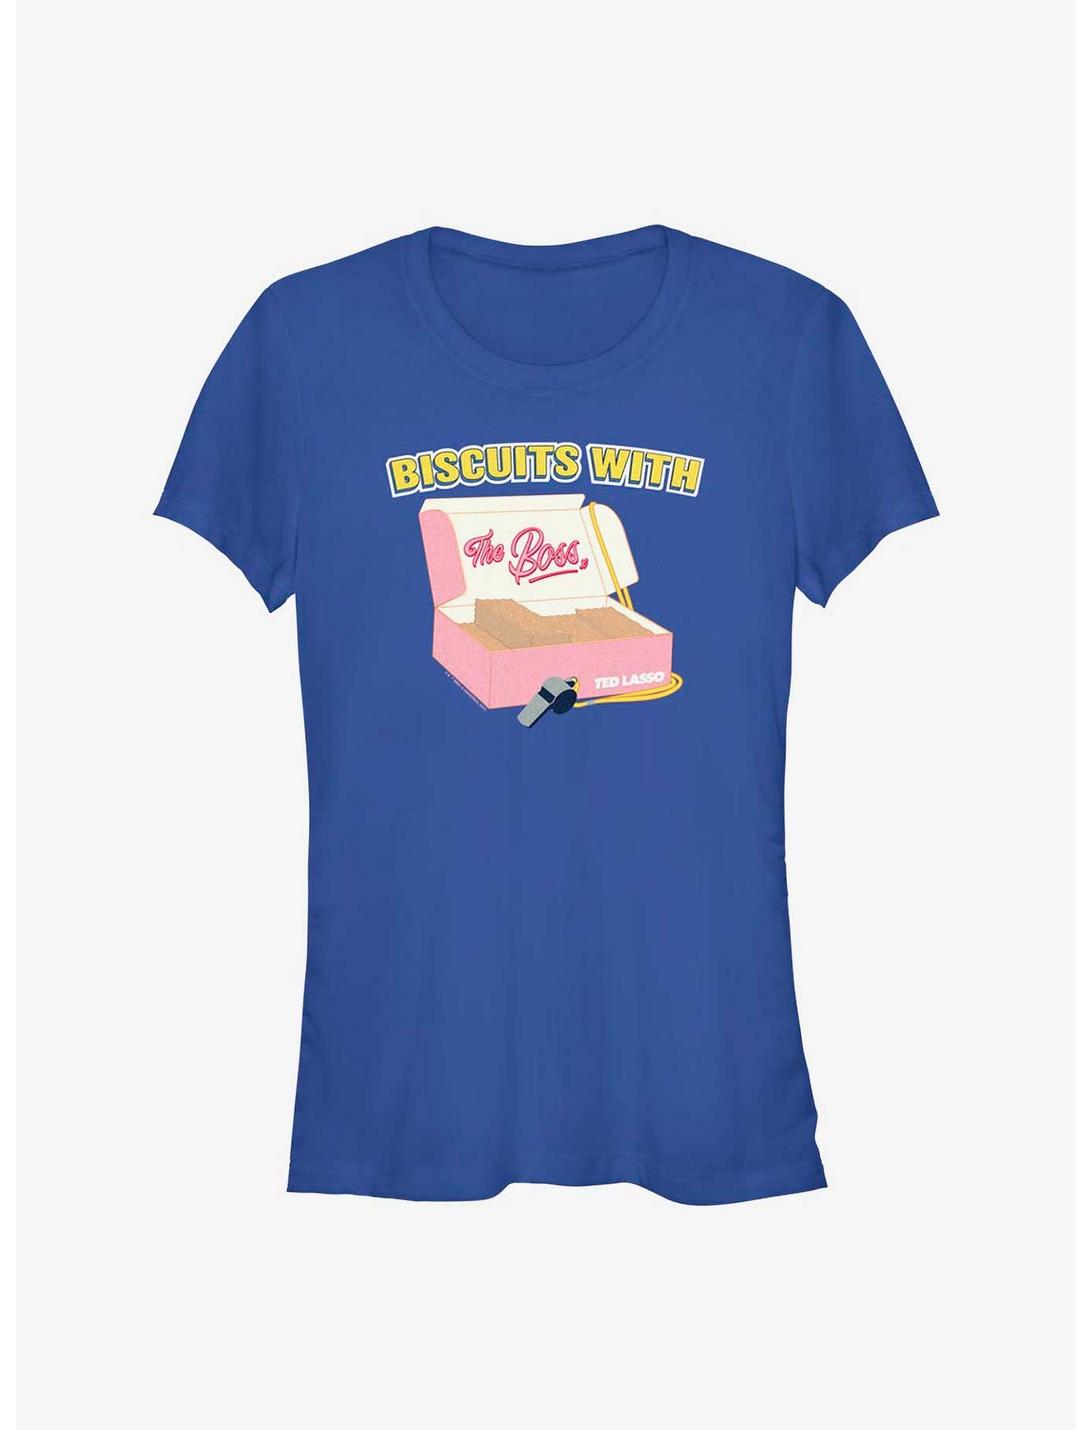 Ted Lasso Biscuits With The Boss Girls T-Shirt, ROYAL, hi-res